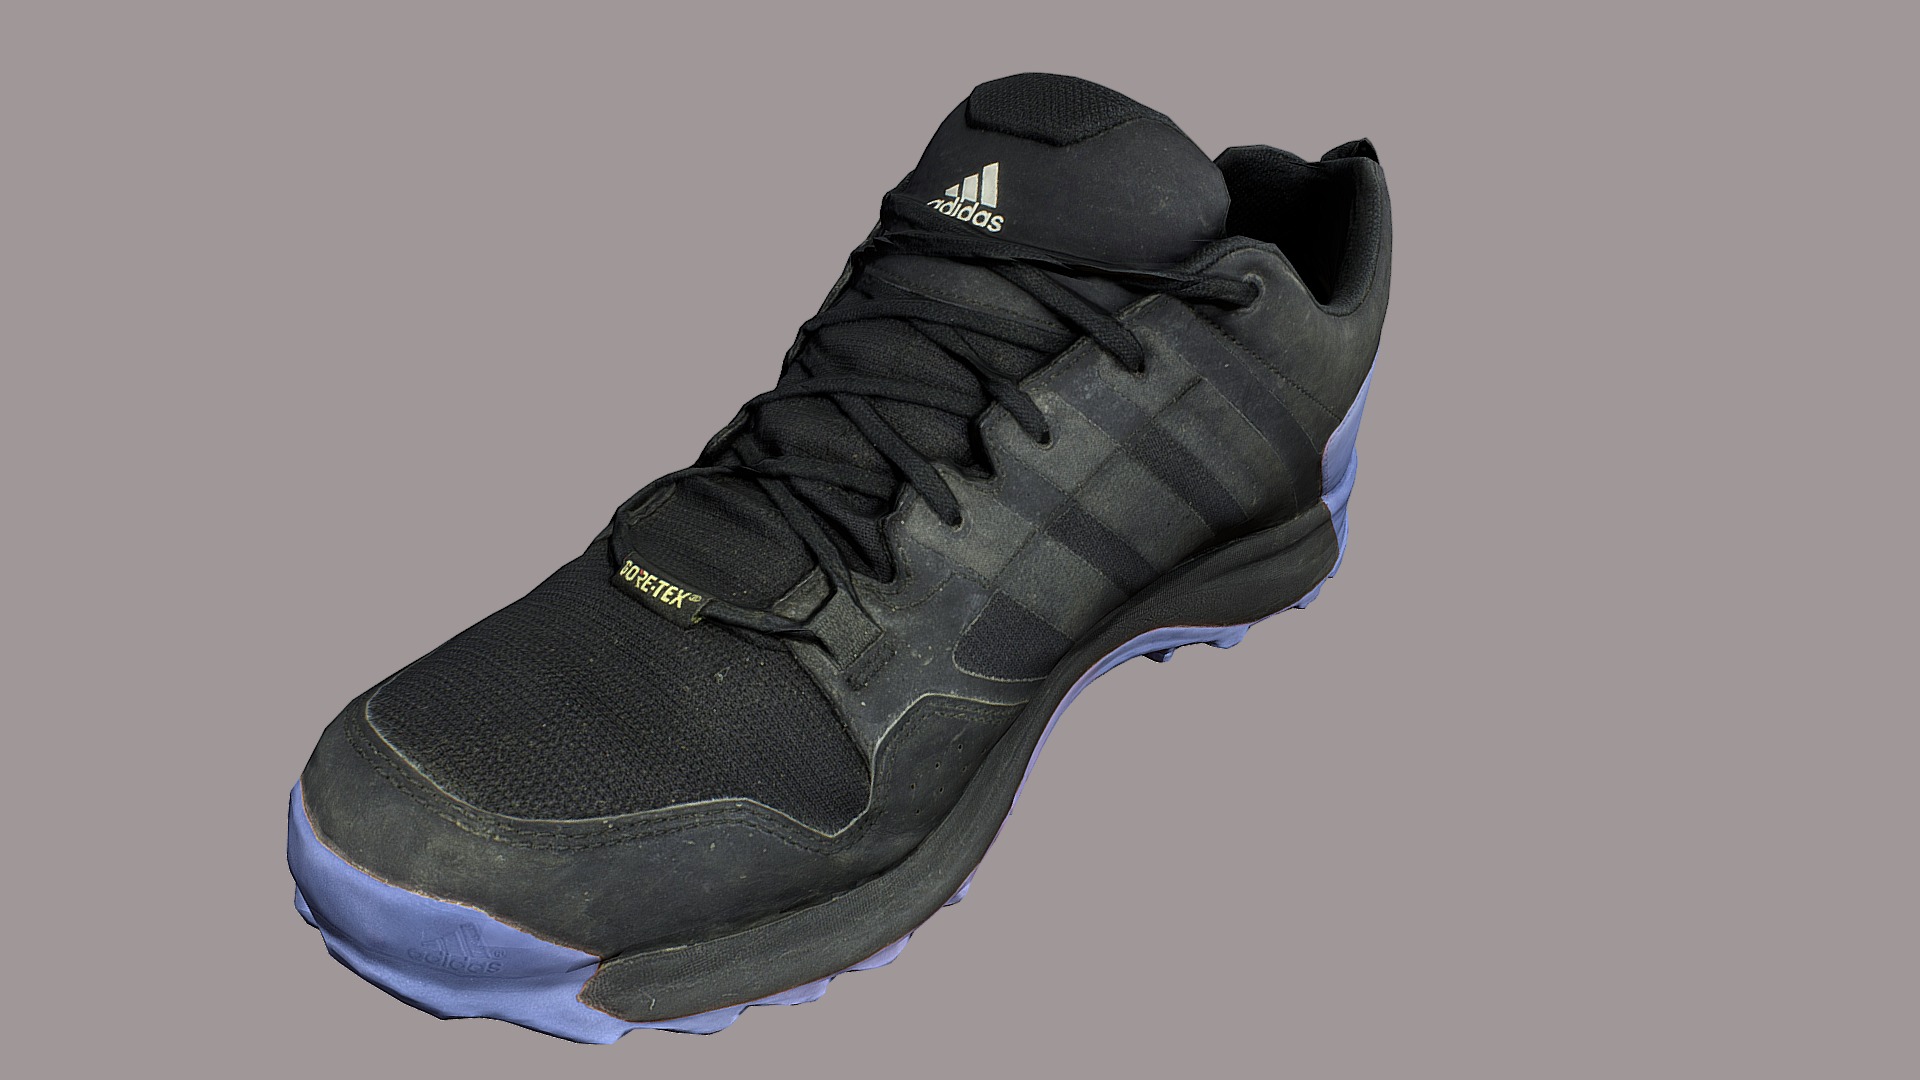 3D model Adidas sneaker shoe 3D model (low-poly) - This is a 3D model of the Adidas sneaker shoe 3D model (low-poly). The 3D model is about a black shoe with a white background.